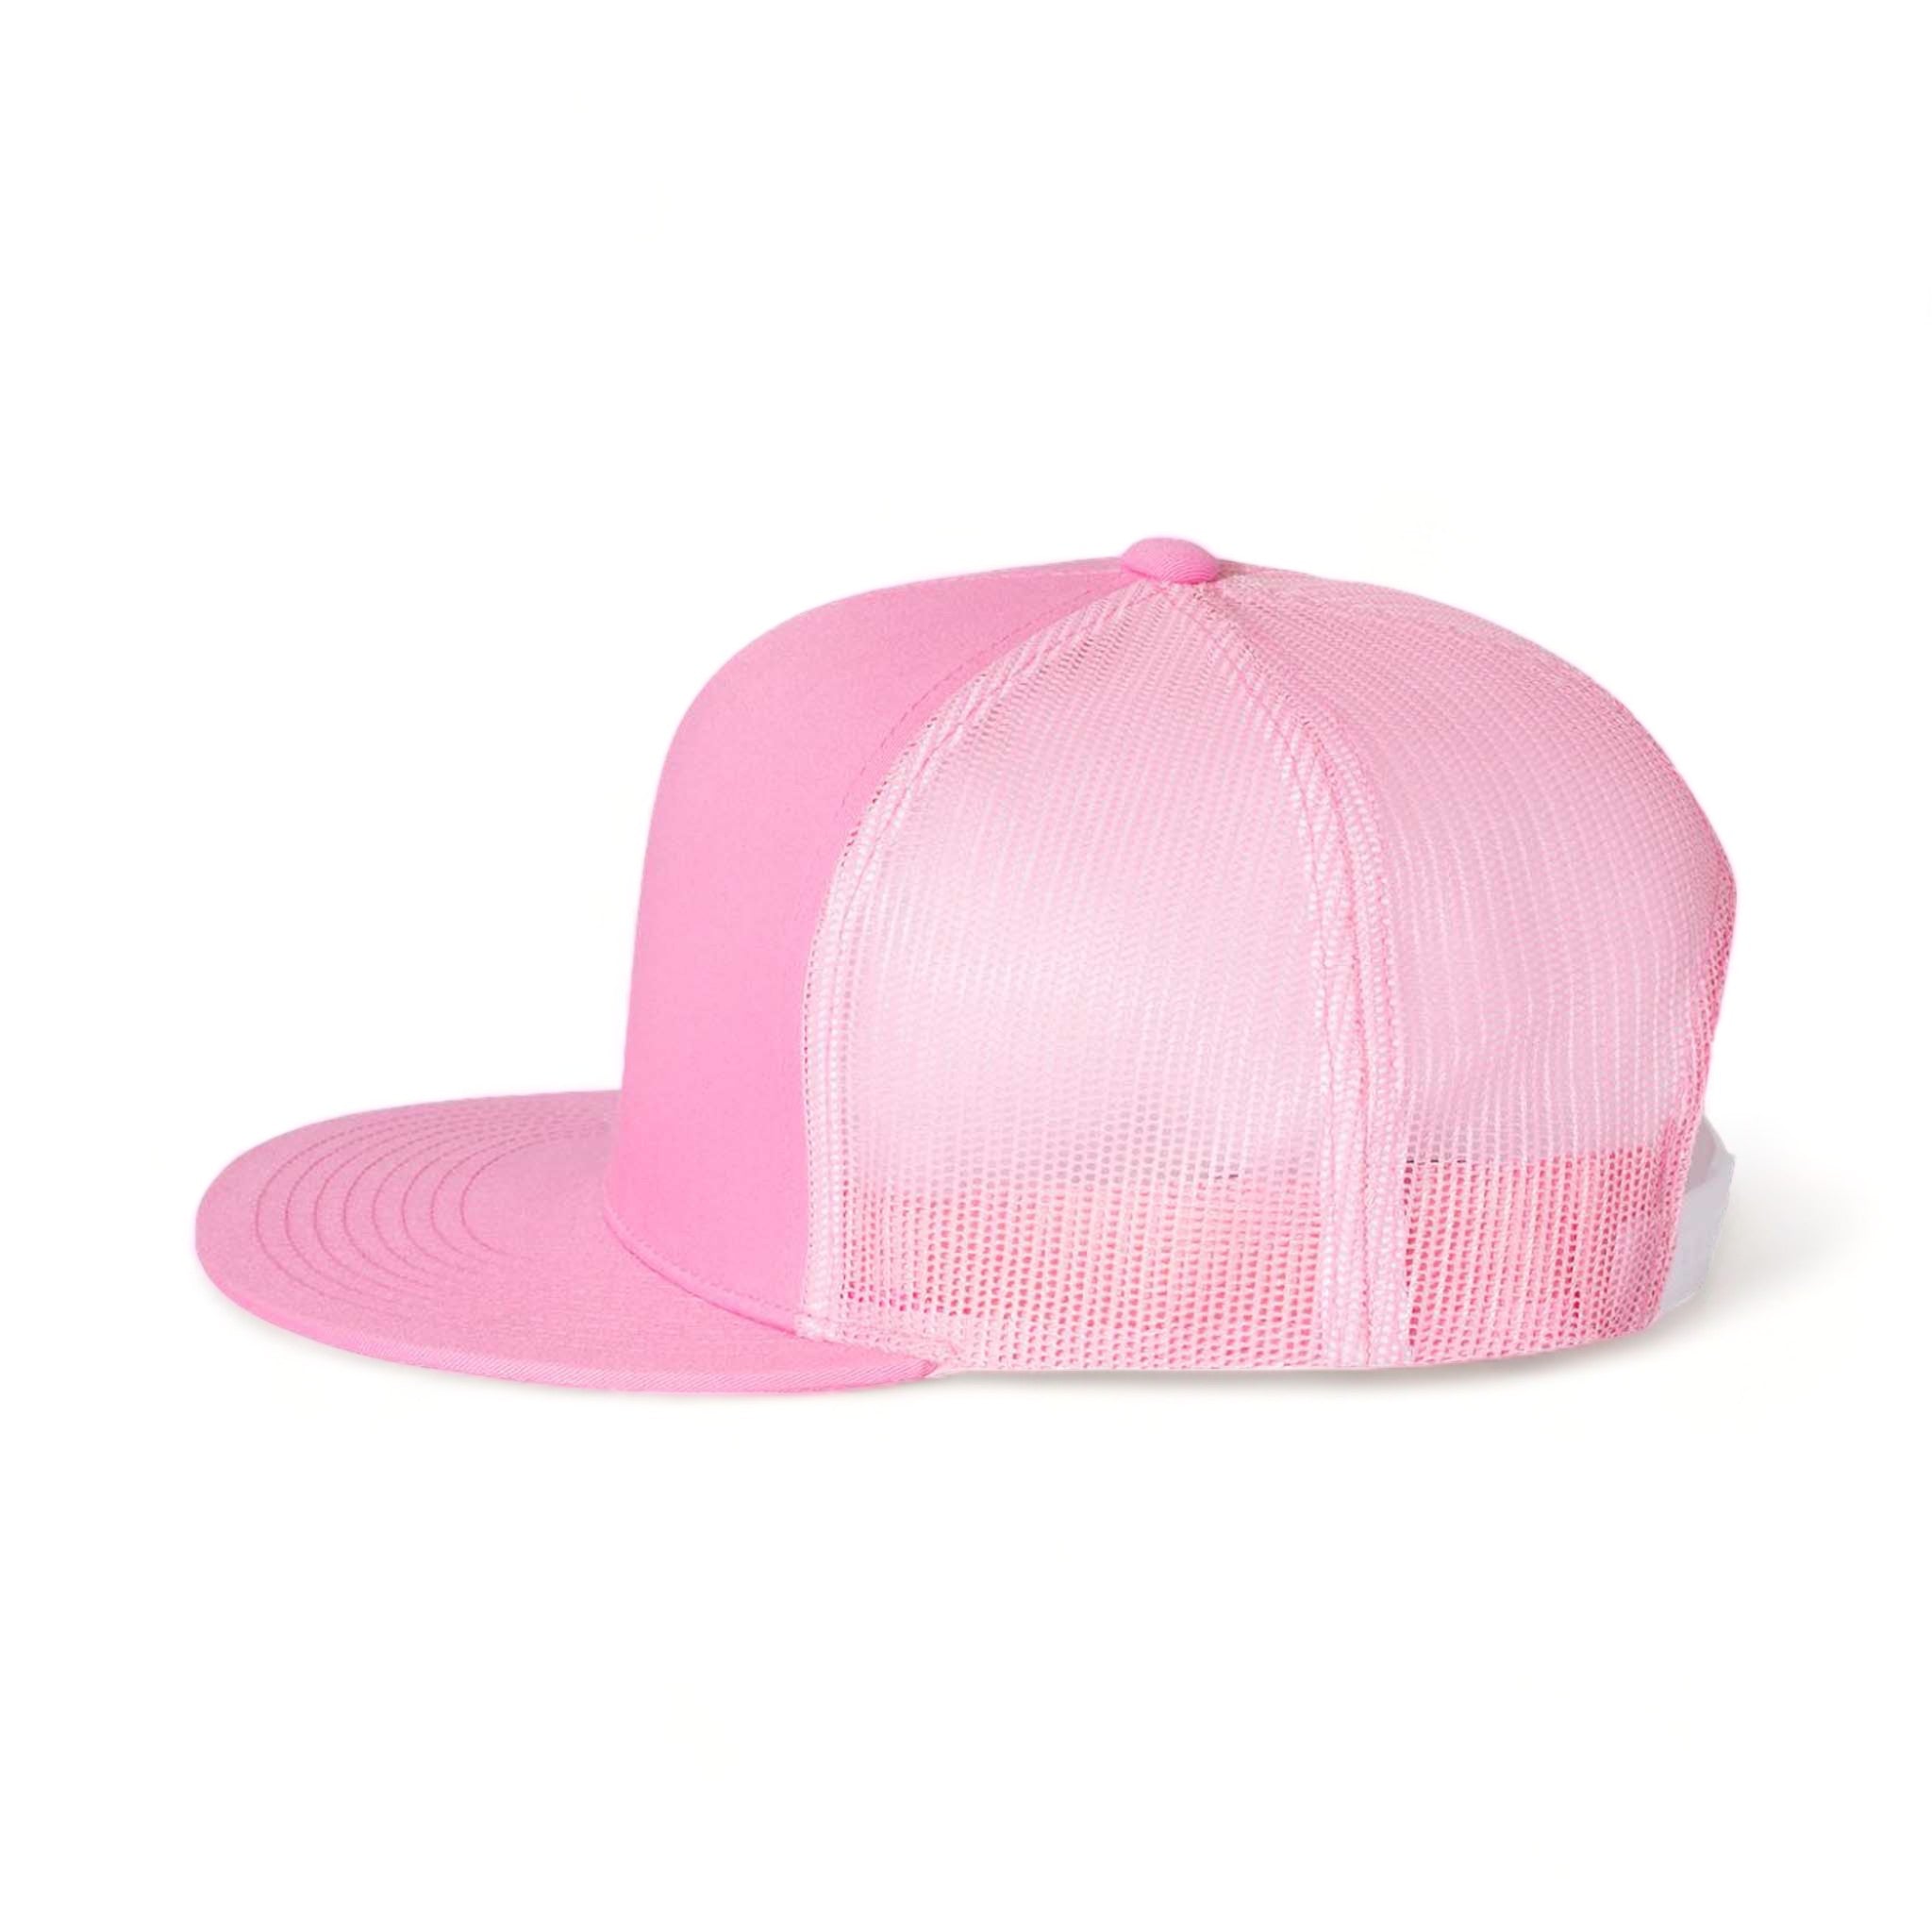 Side view of YP Classics 6006 custom hat in pink